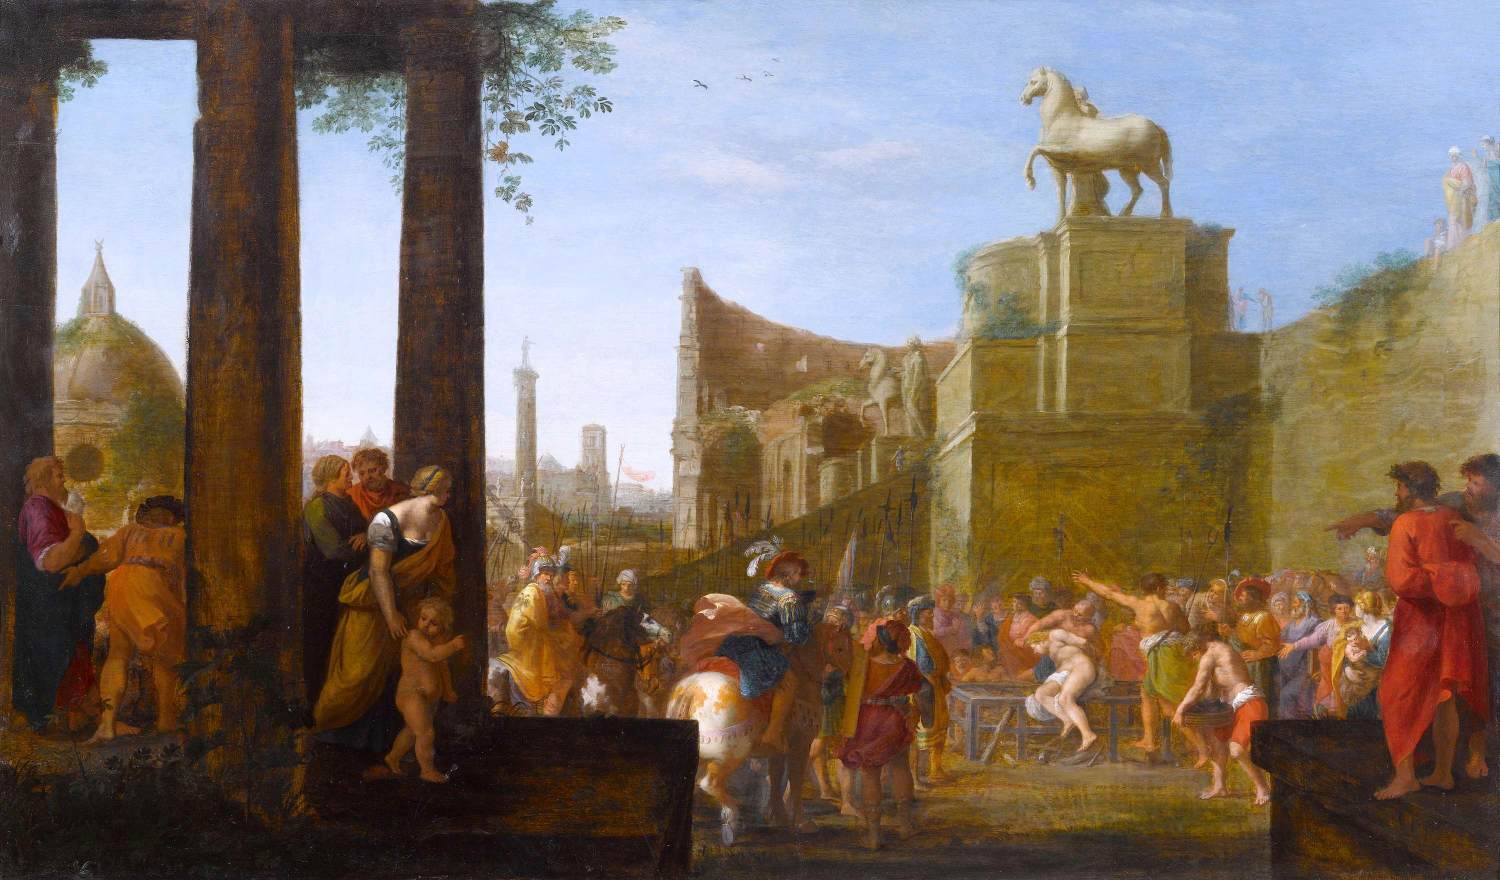 View of Capricho de Roma with The Martyrdom of San Lorenzo